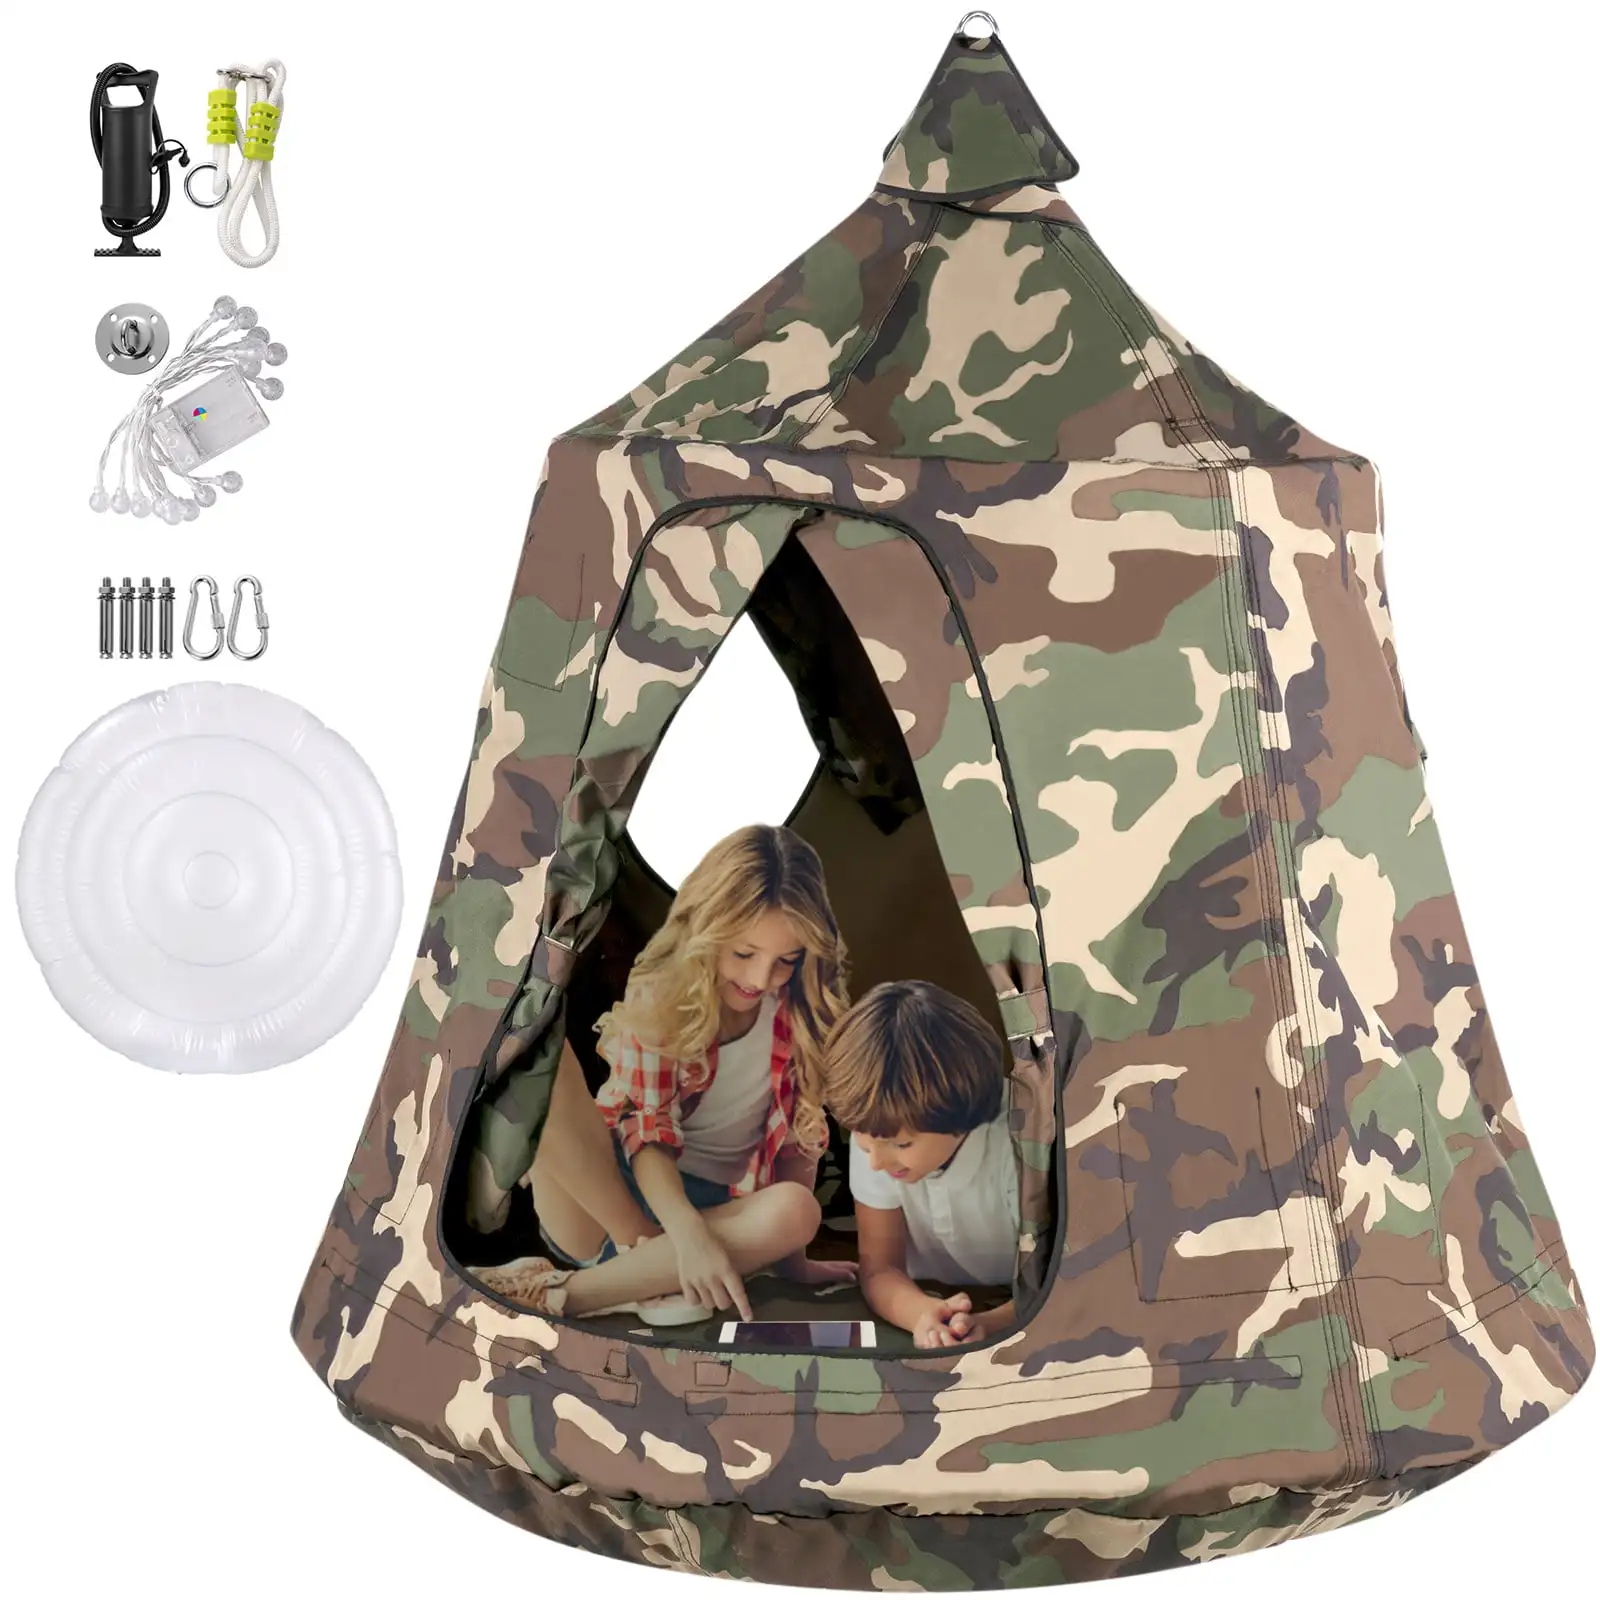 Hanging Tree Tent for Kids 46 H x 43.4 Diam Waterproof Portable Indoor or Outdoor Use with Led Decoration Lights